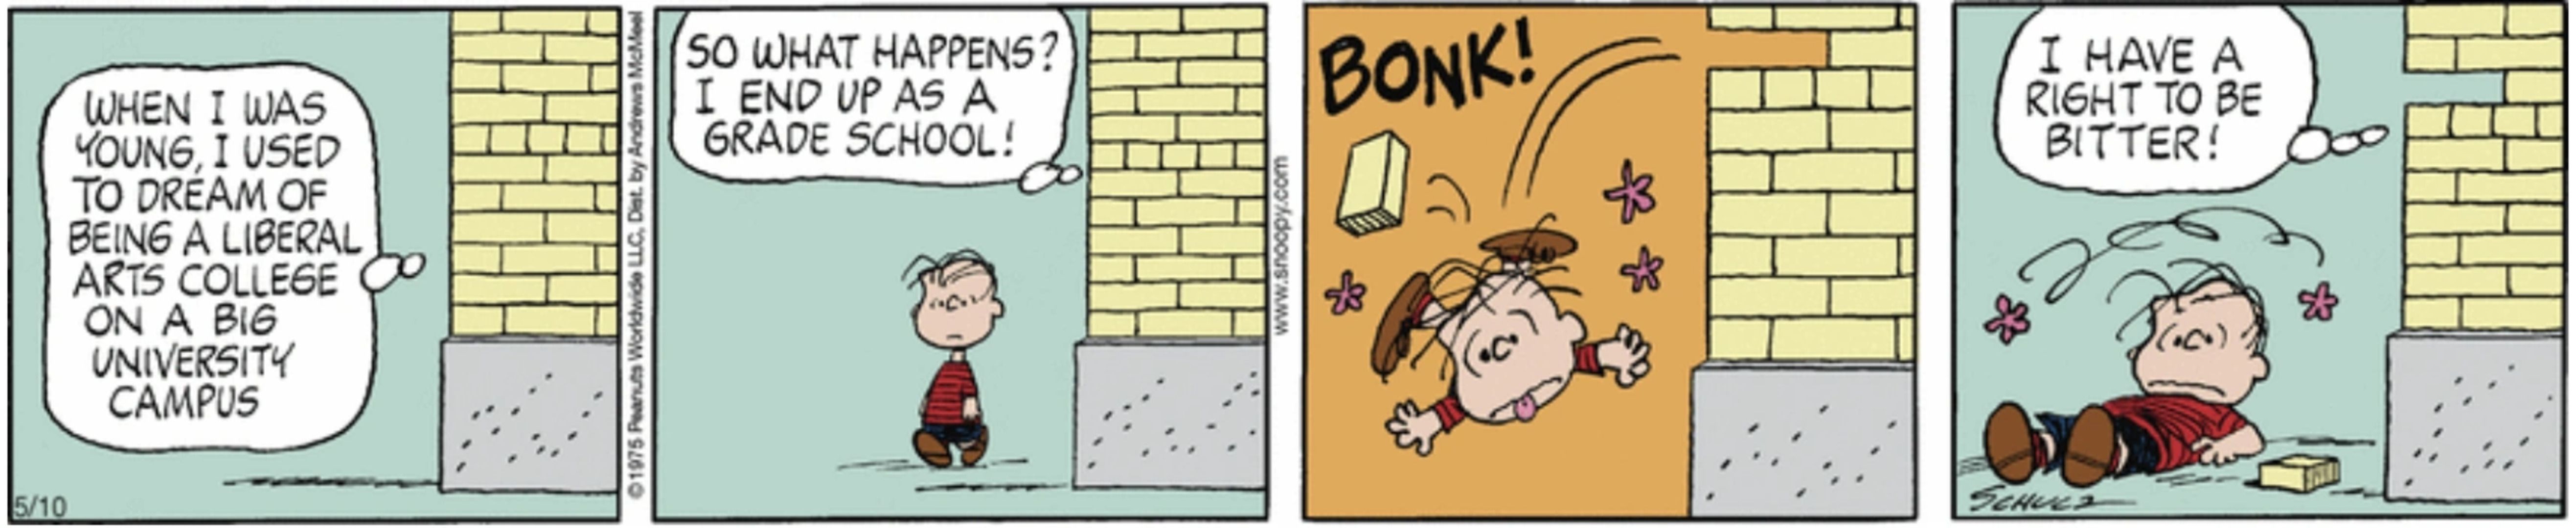 Linus getting hit in the head with a brick, as the Peanuts' school building laments its trajectory in life.